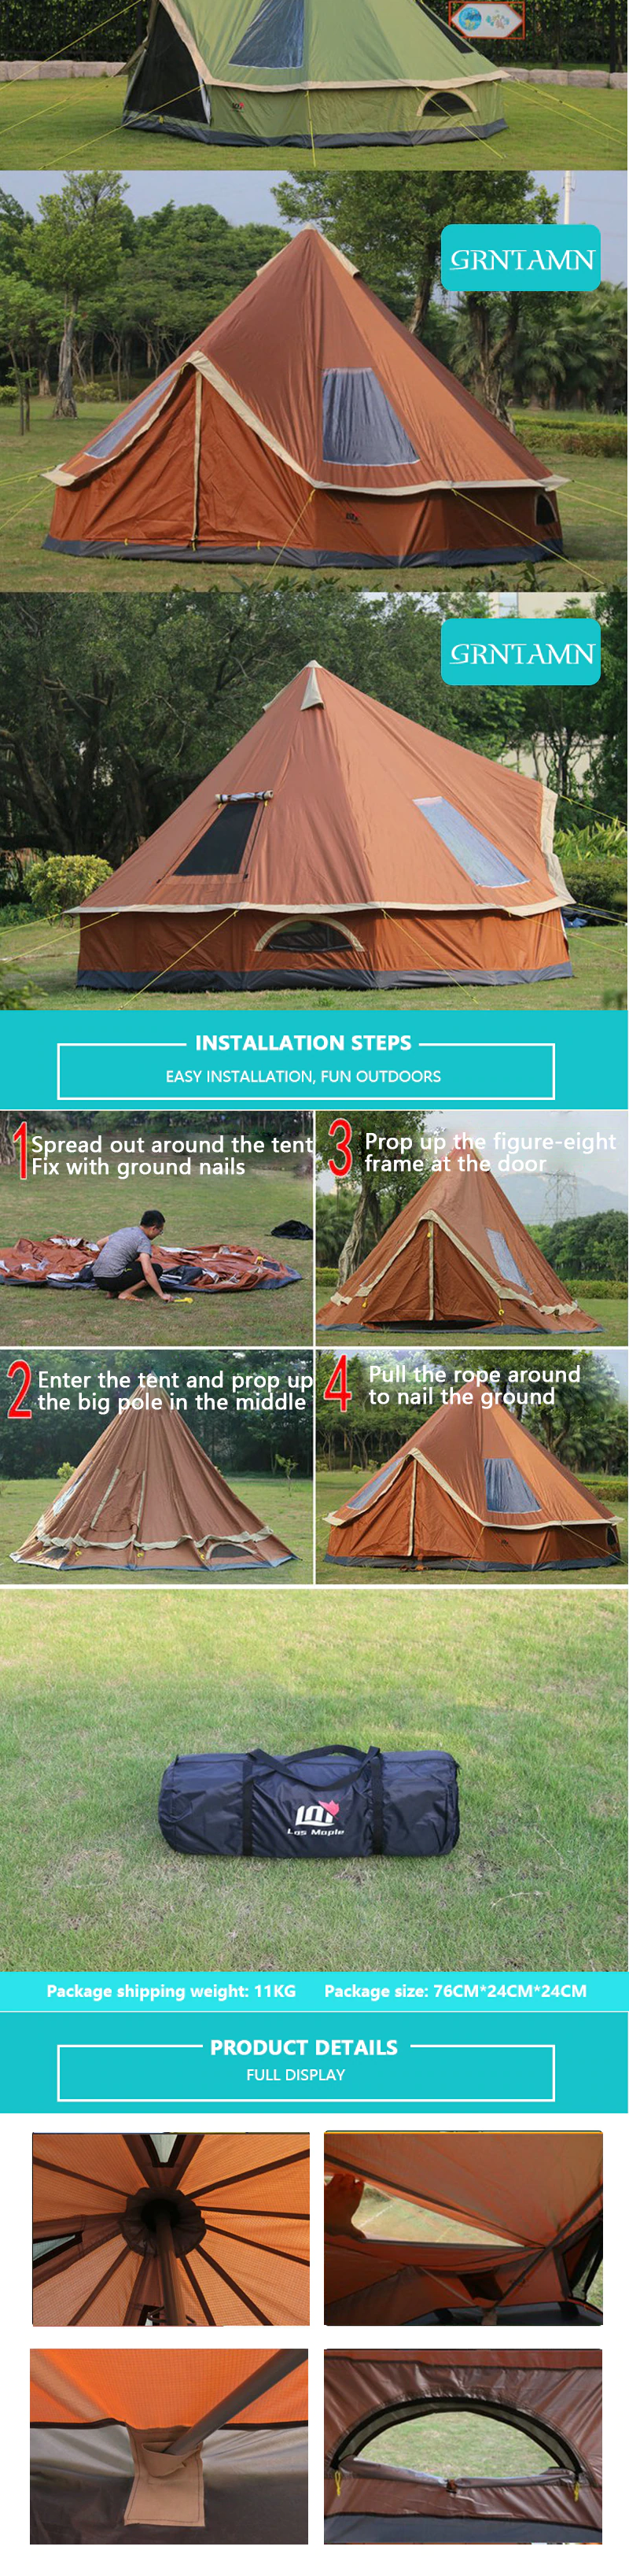 Cheap Goat Tents Grntamn 4m Campping Bell Tent 300d Oxford Fabric Waterproof 6000 Pu 10 Person For Family Camp Outdoor